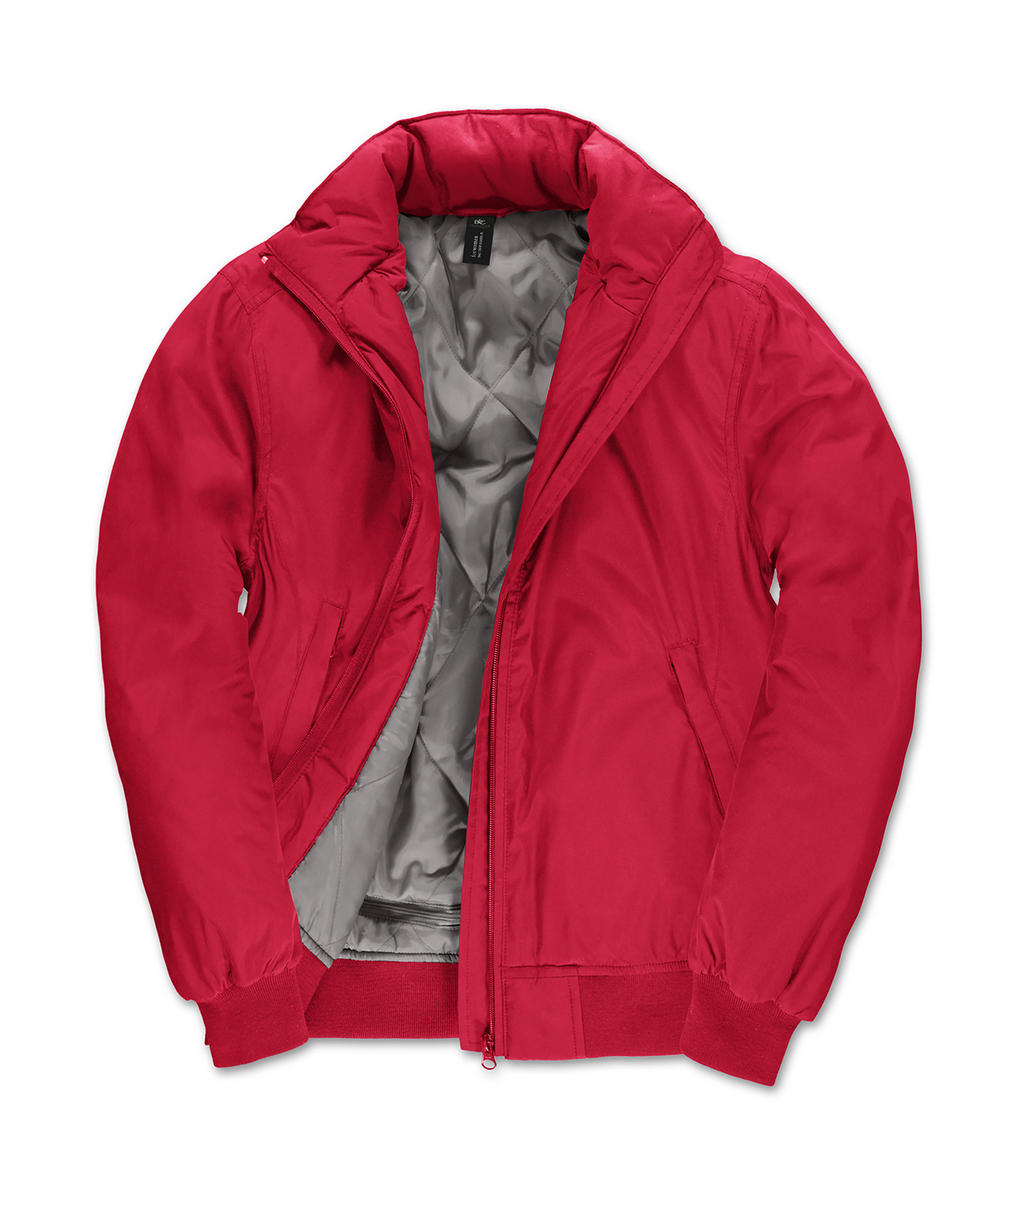  Crew Bomber/women Jacket in Farbe Red/Warm Grey